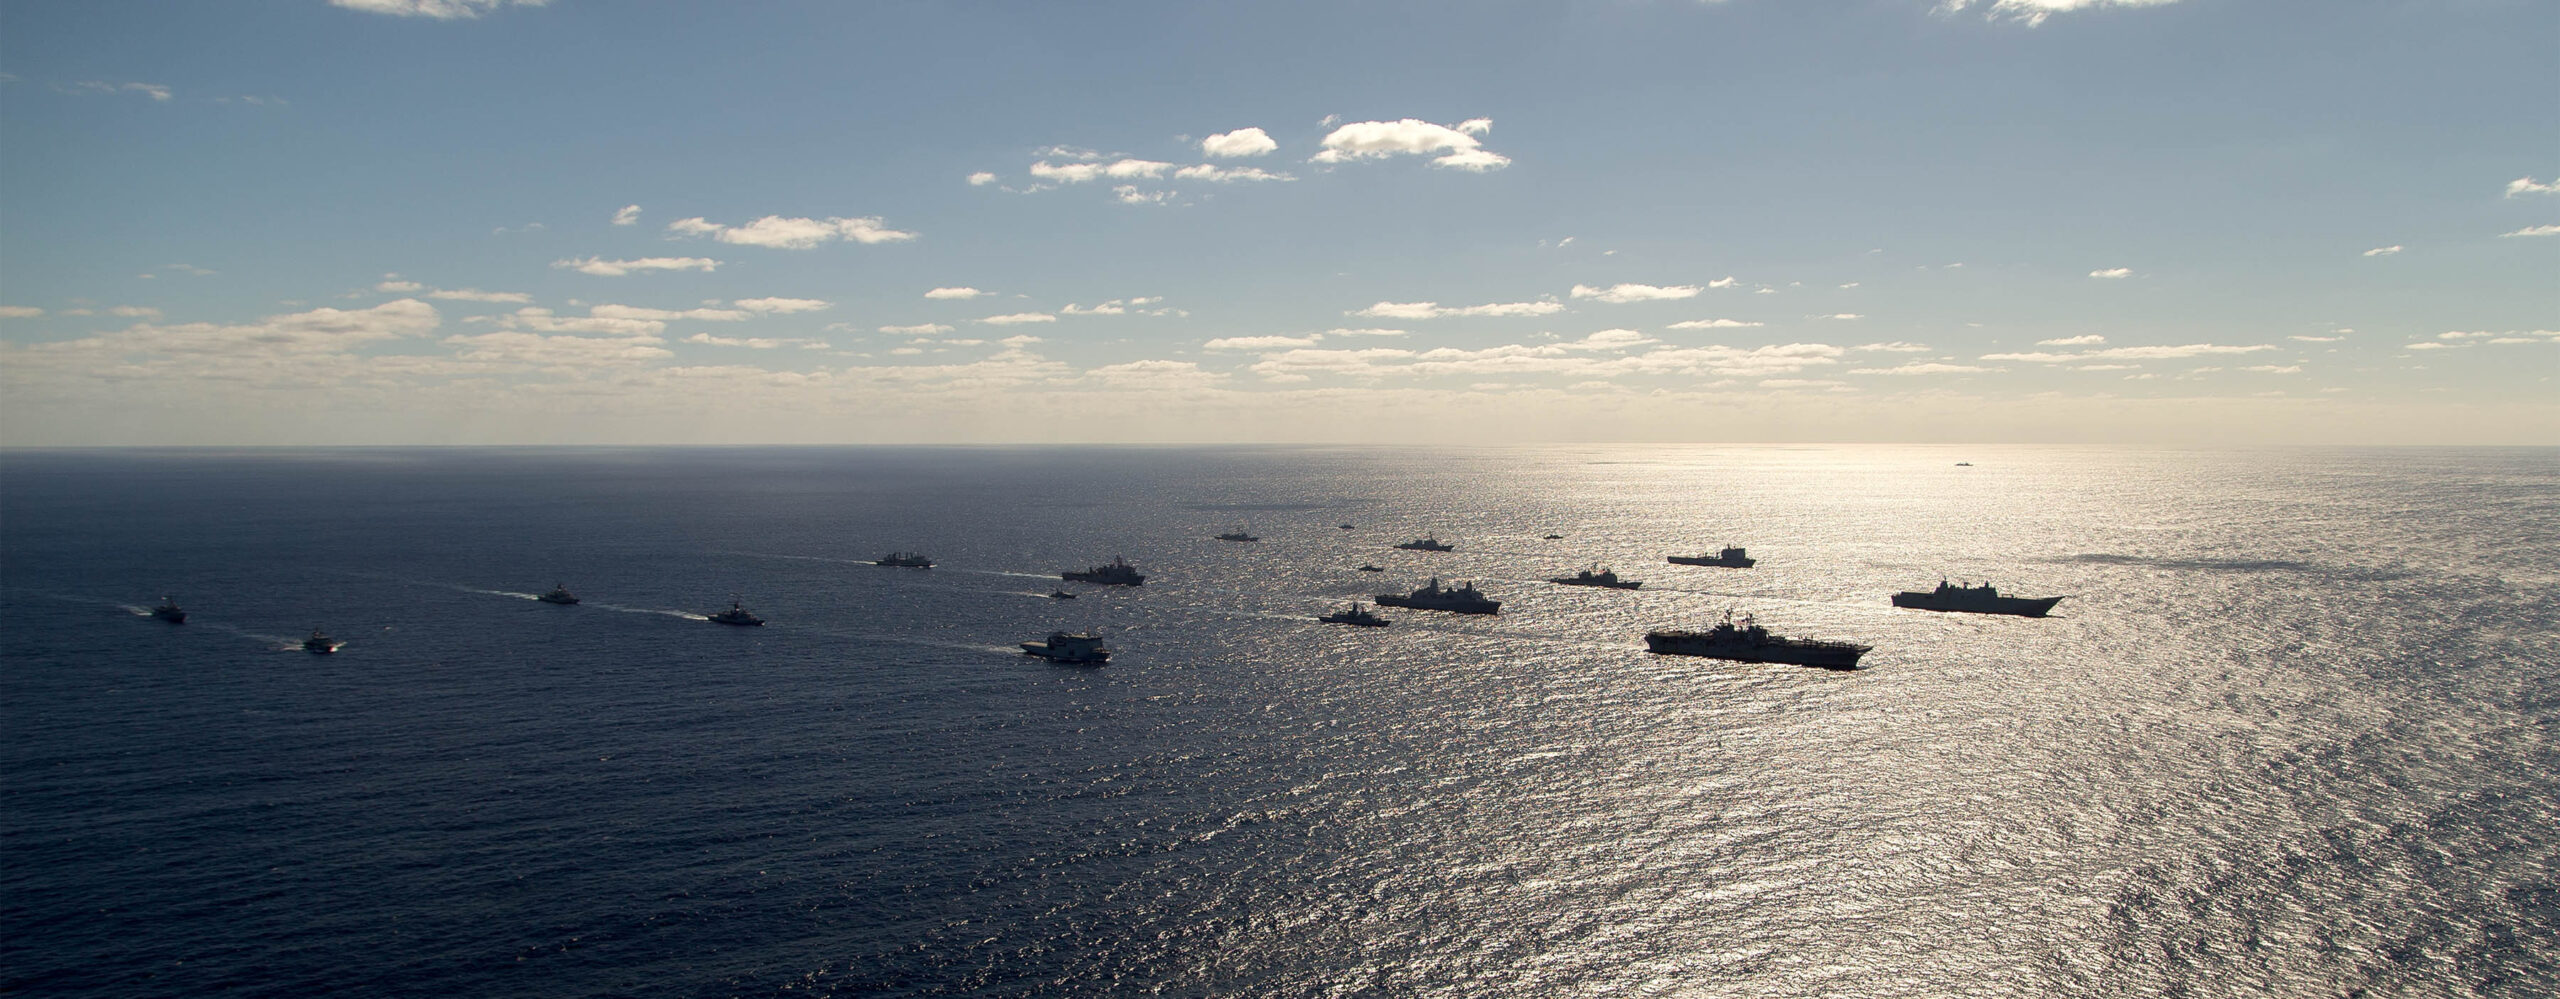 Navy Ships from Australia, United States of America and New Zealand come together in formation at the completion of Exercise Talisman Saber 17. *** Local Caption *** The Talisman Saber series of exercises is the principal Australian and United States Military Training activity focused on the planning and conduct of mid-intensity high end war fighting. Exercise Talisman Saber is the largest combined, joint military exercise undertaken by the Australian Defence Force (ADF) and provides invaluable experience to ADF personnel to improve combat training, readiness and interoperability, exposing participants to a wide spectrum of military capabilities and training experiences. The biennial exercise was conducted for the seventh time in 2017, involving more than 30,000 US and Australian participants, operating in the maritime, land and air environments.